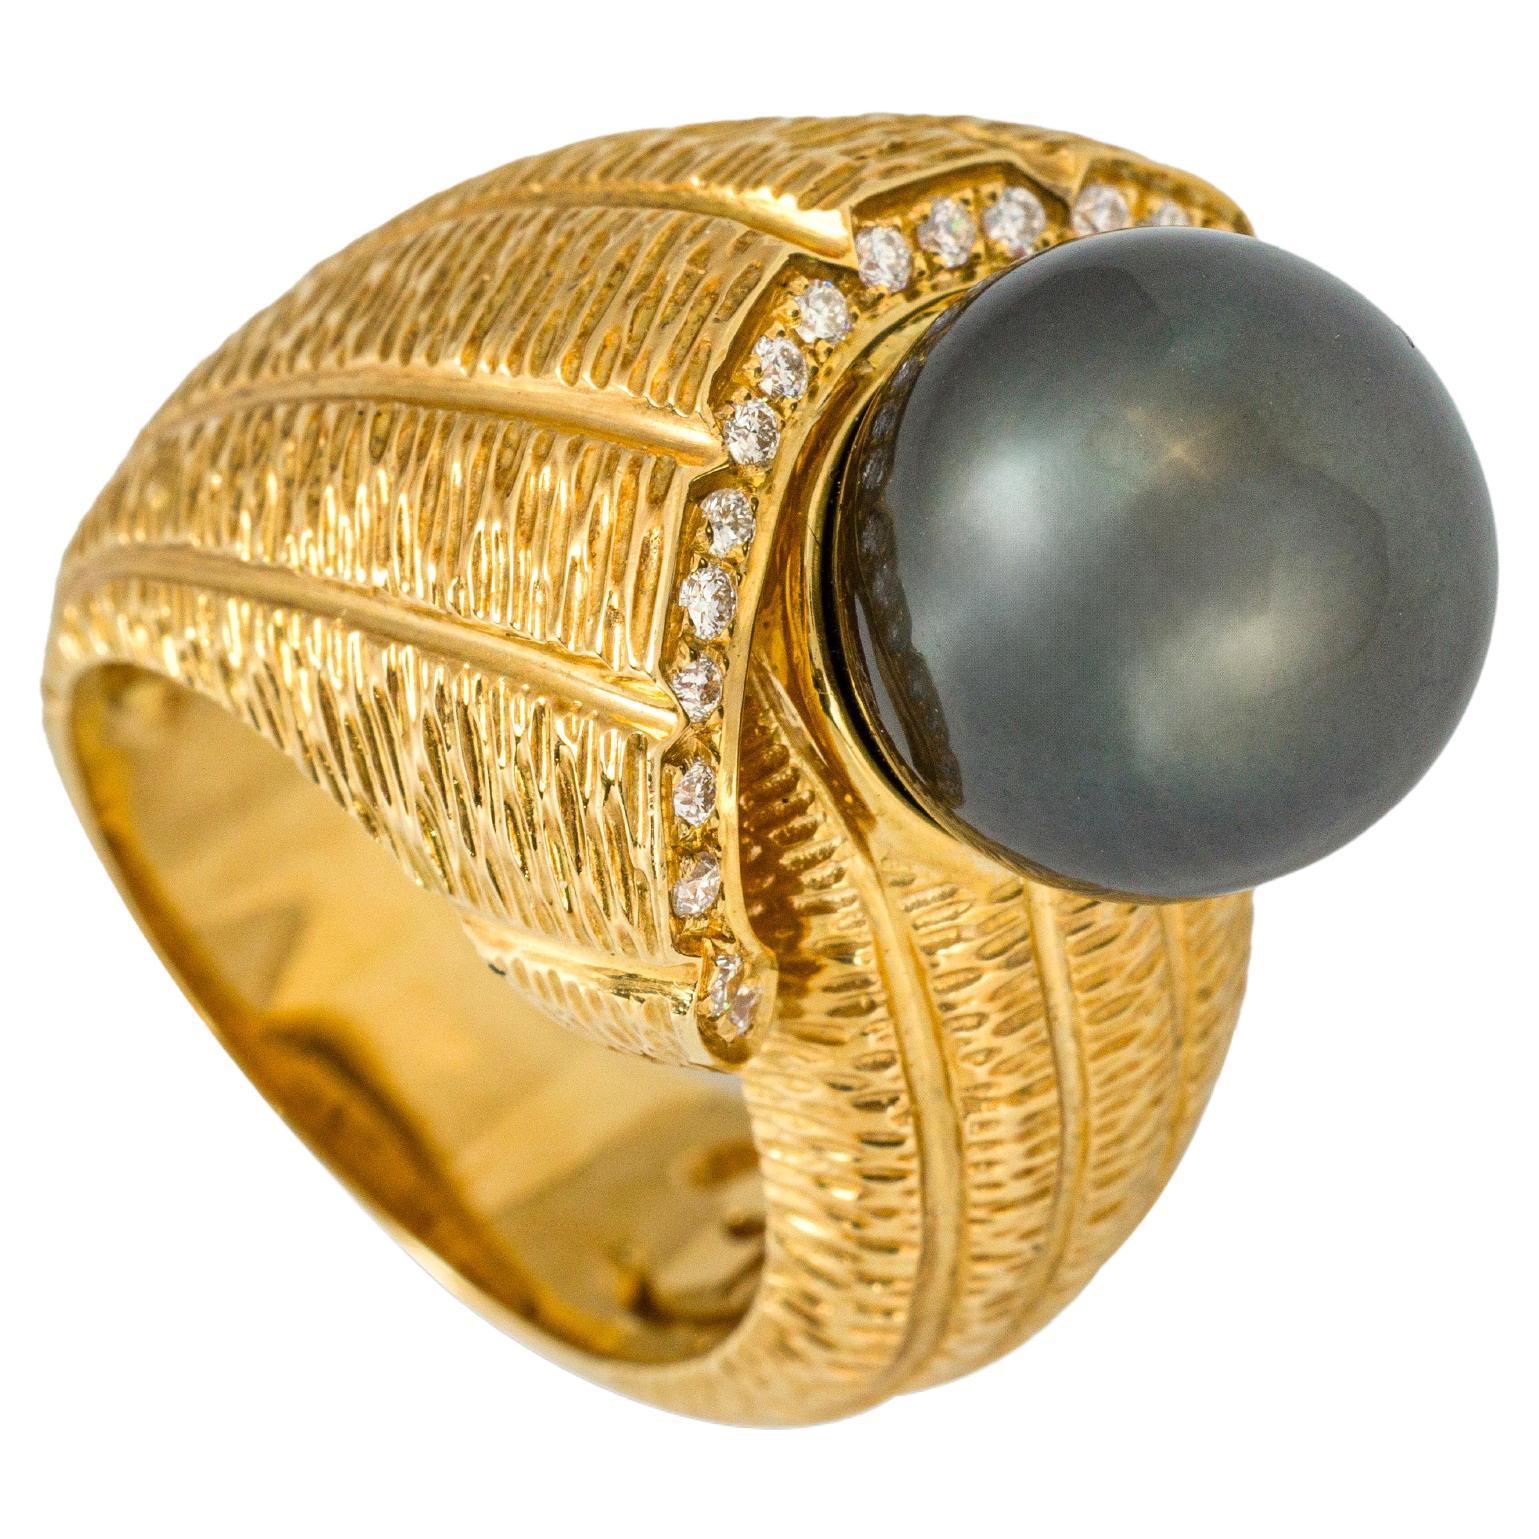 "Costis" Snail Shell Ring with South Sea Black Pearl of 3.03 grams  For Sale